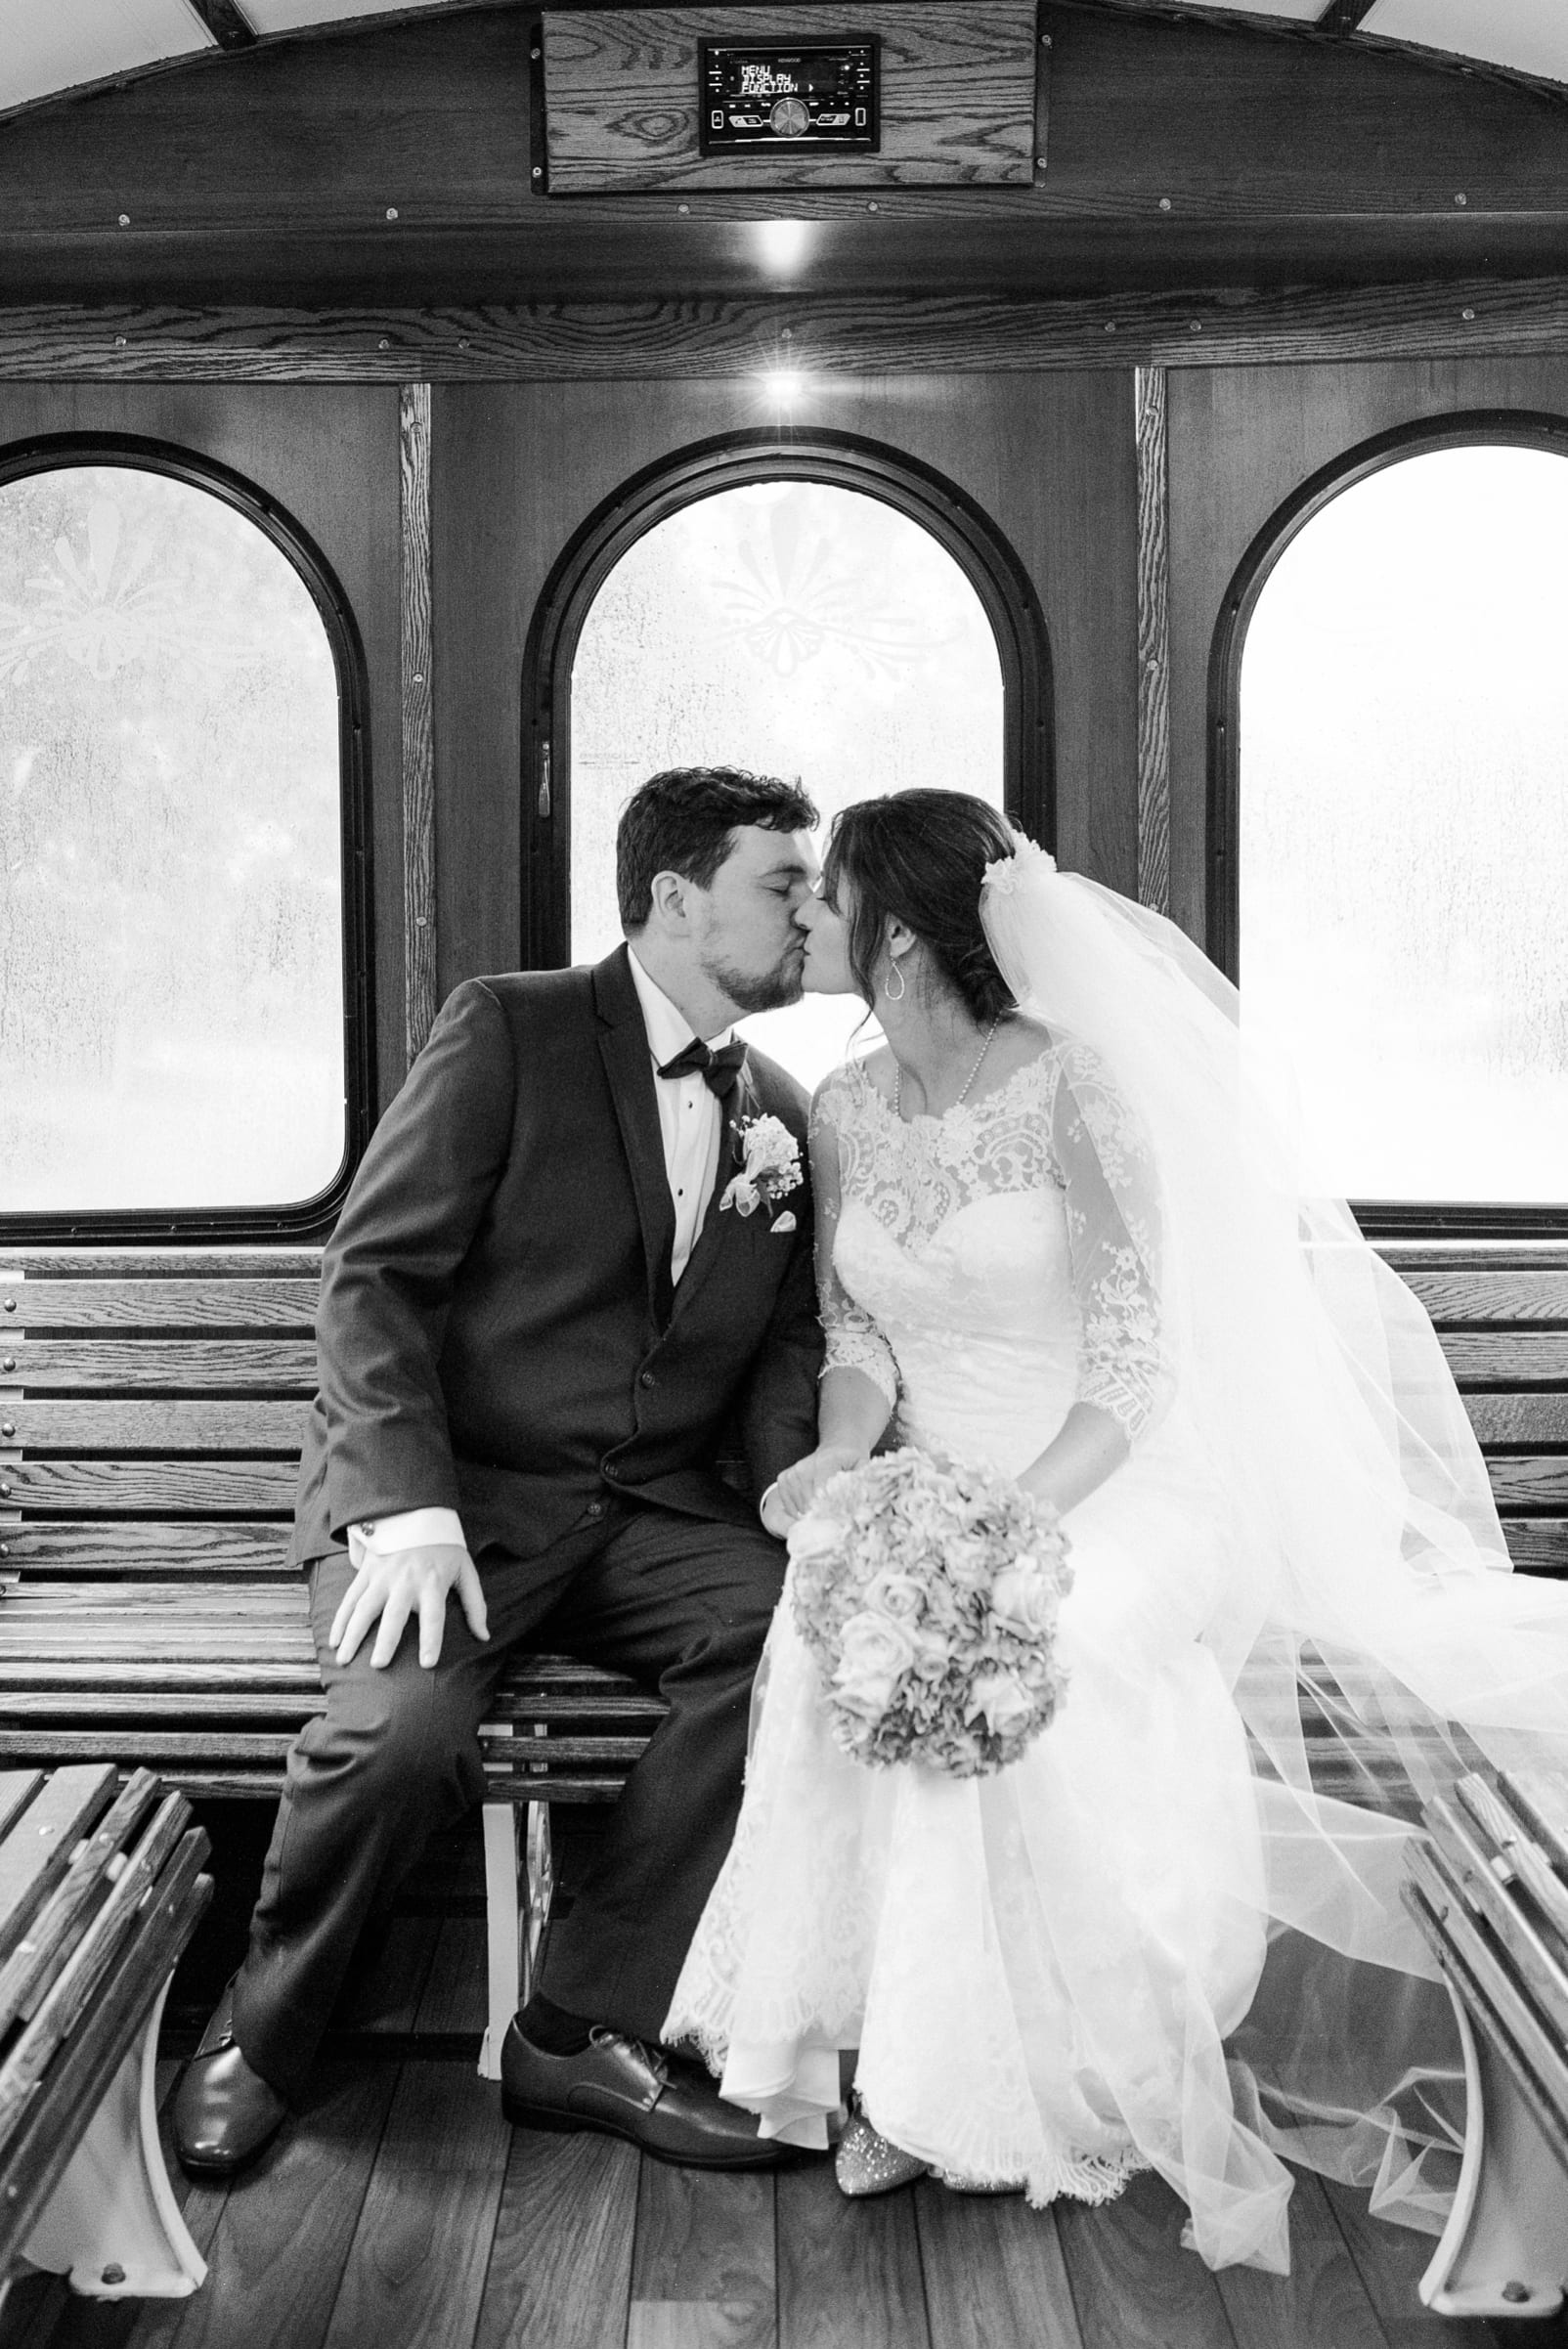 The Great Raleigh Trolley bride and groom kissing in the back of the trolley after just getting married photo